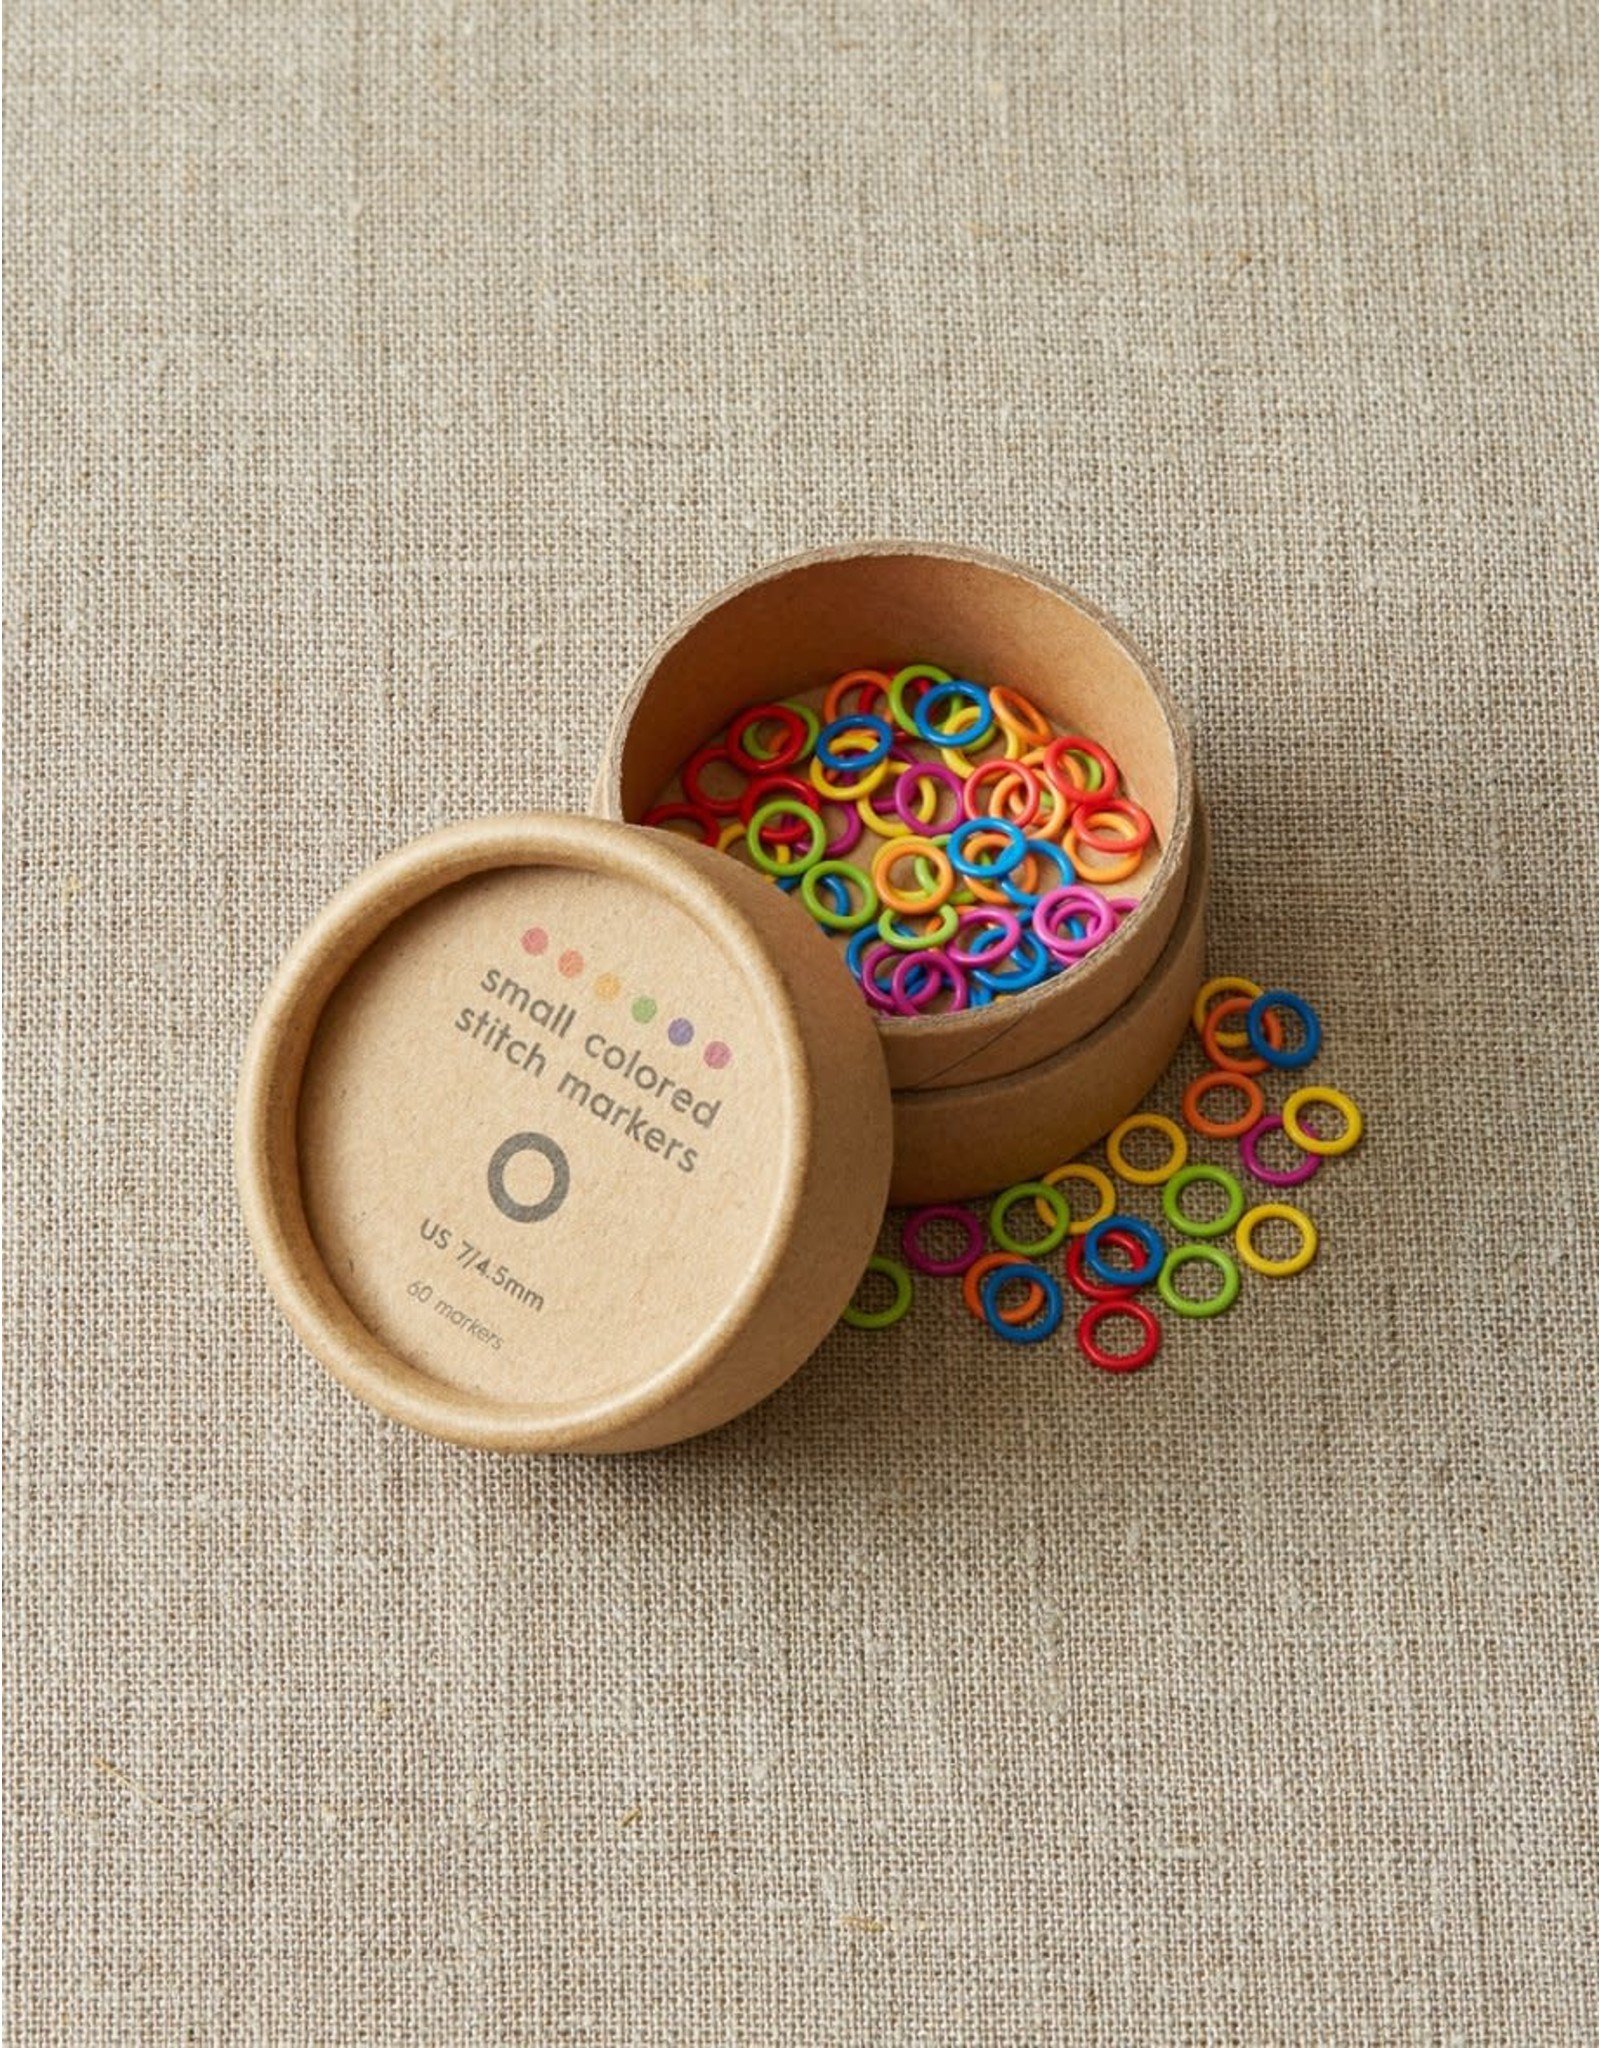 Small Colorful Ring Stitch Markers by Cocoknits